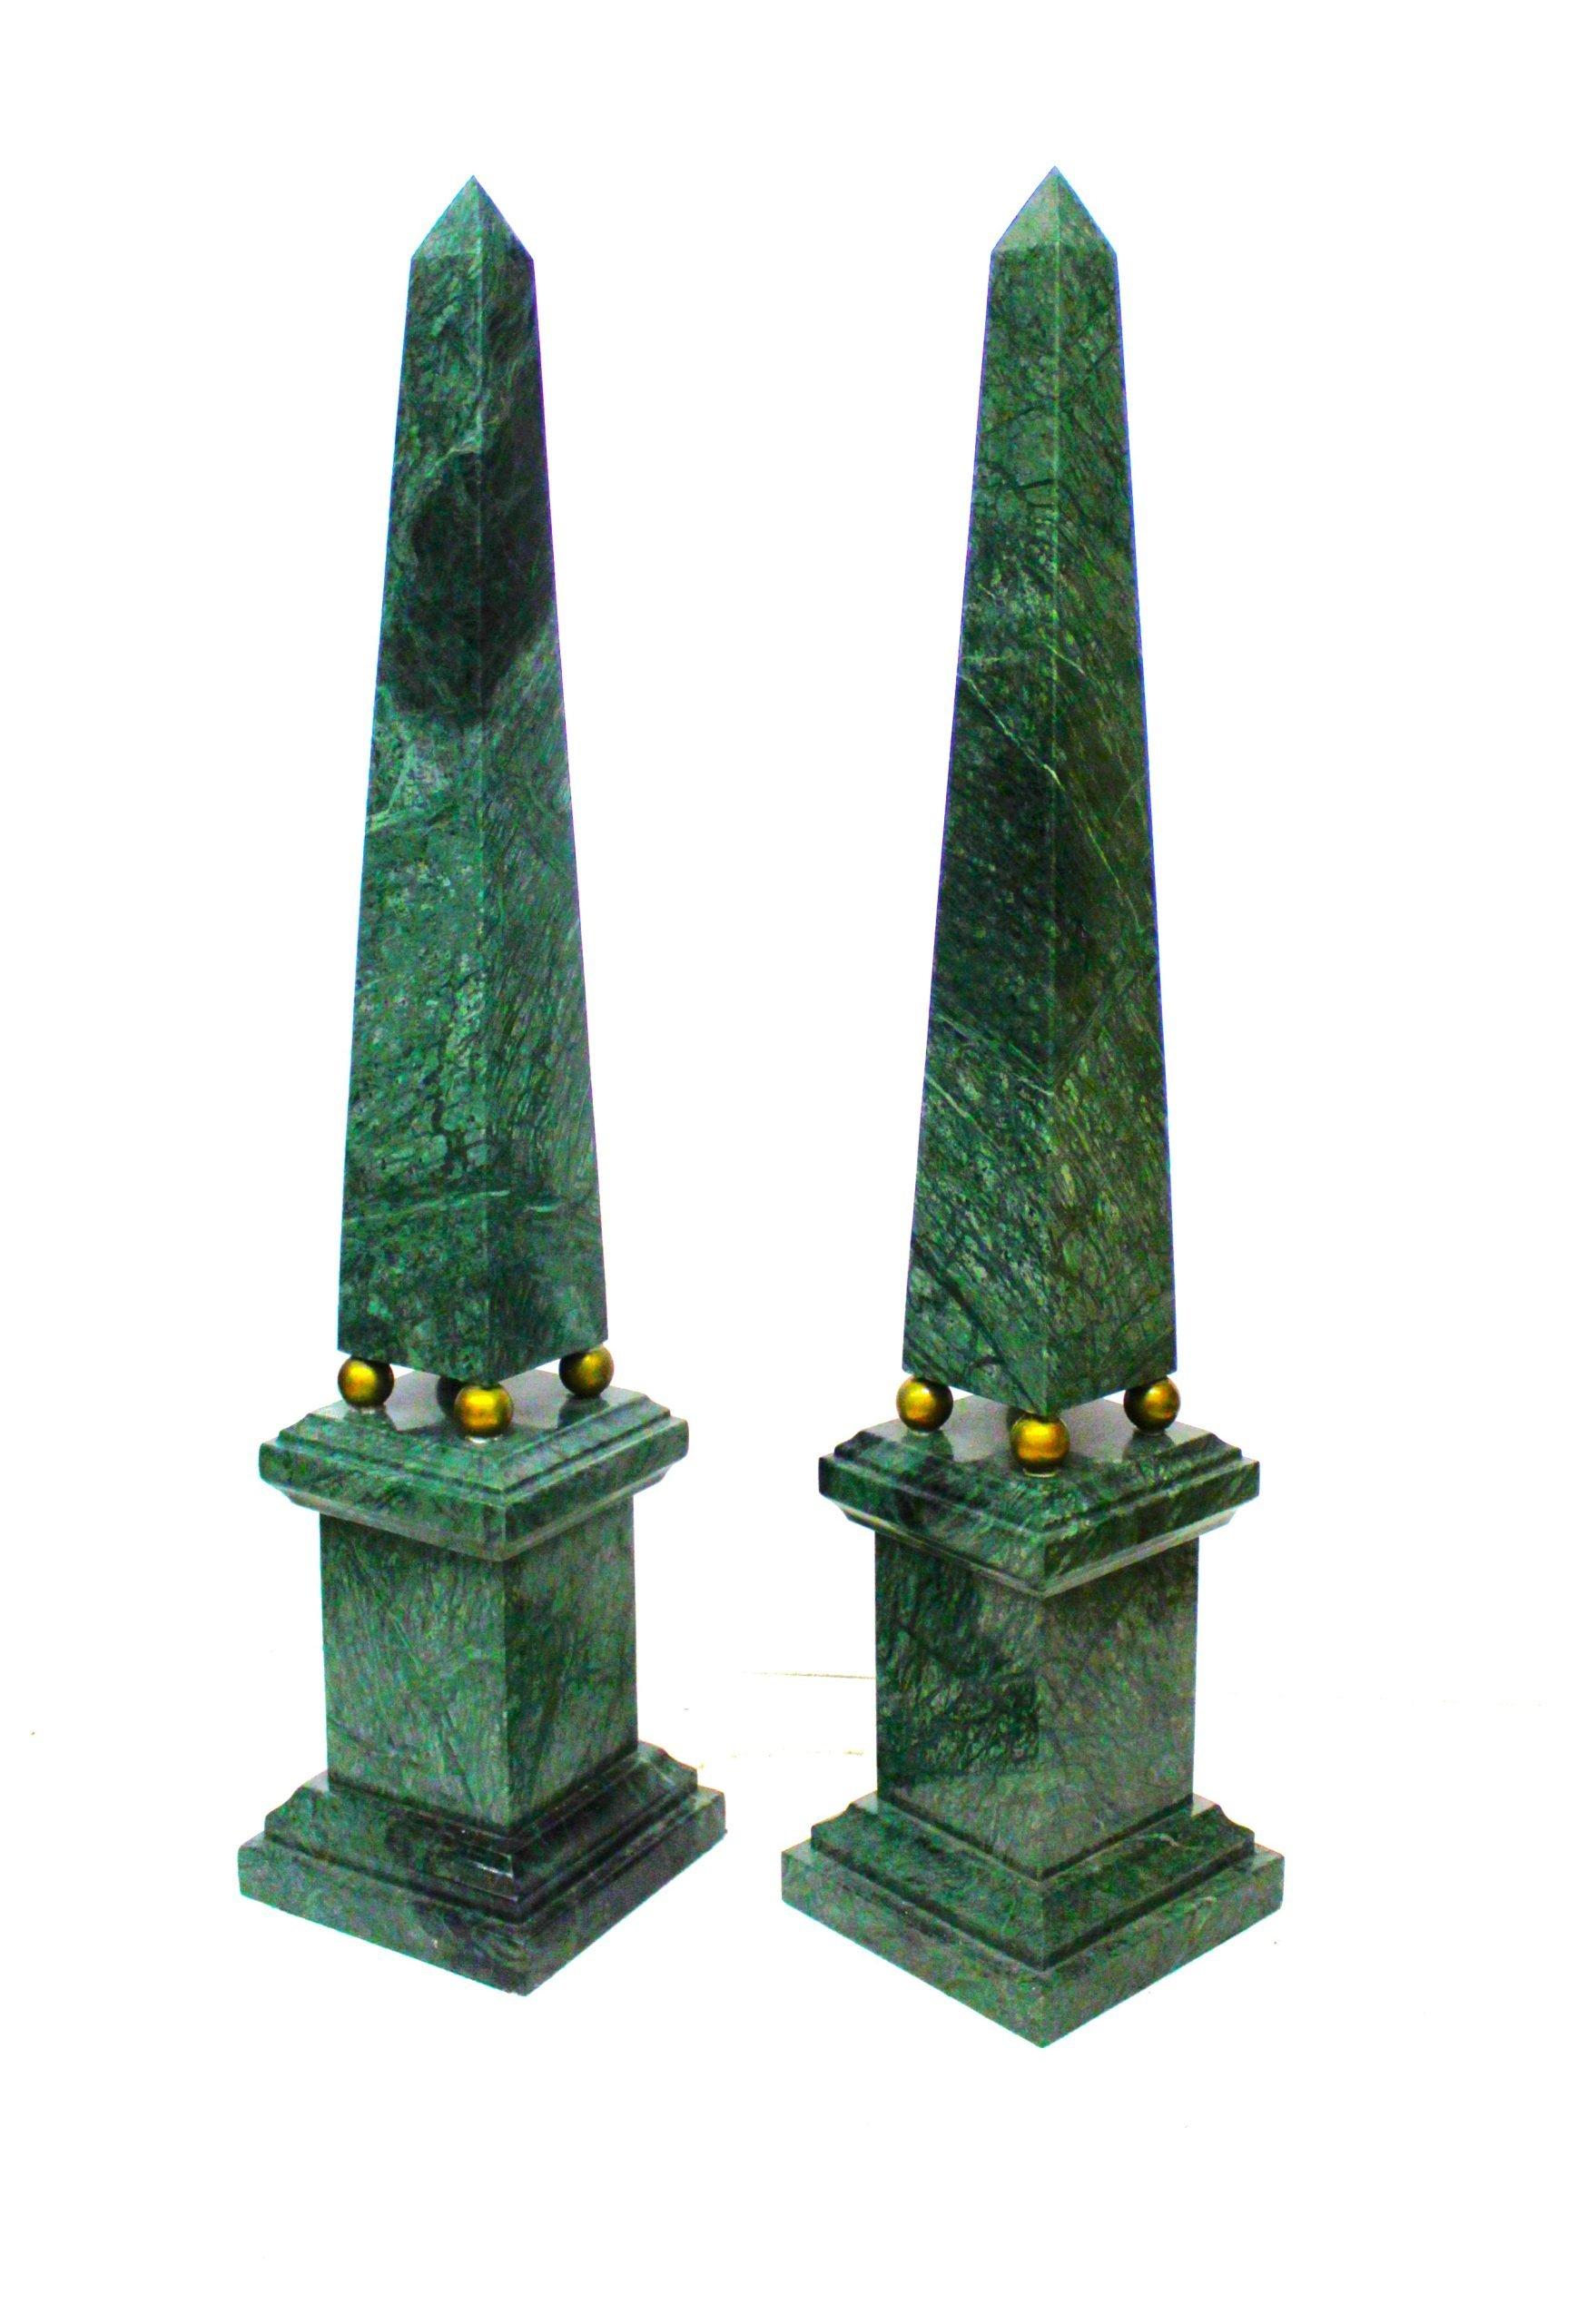 Pair of obelisks in aquamarine green marble with gilded bronze spheres. ADDITIONAL PHOTOS, INFORMATION OF THE LOT AND SHIPPING INFORMATION CAN BE REQUEST BY SENDING AN EMAIL. Indicative shipping costs in Italy: 150€ and Europe: 200€. Tags: Coppia